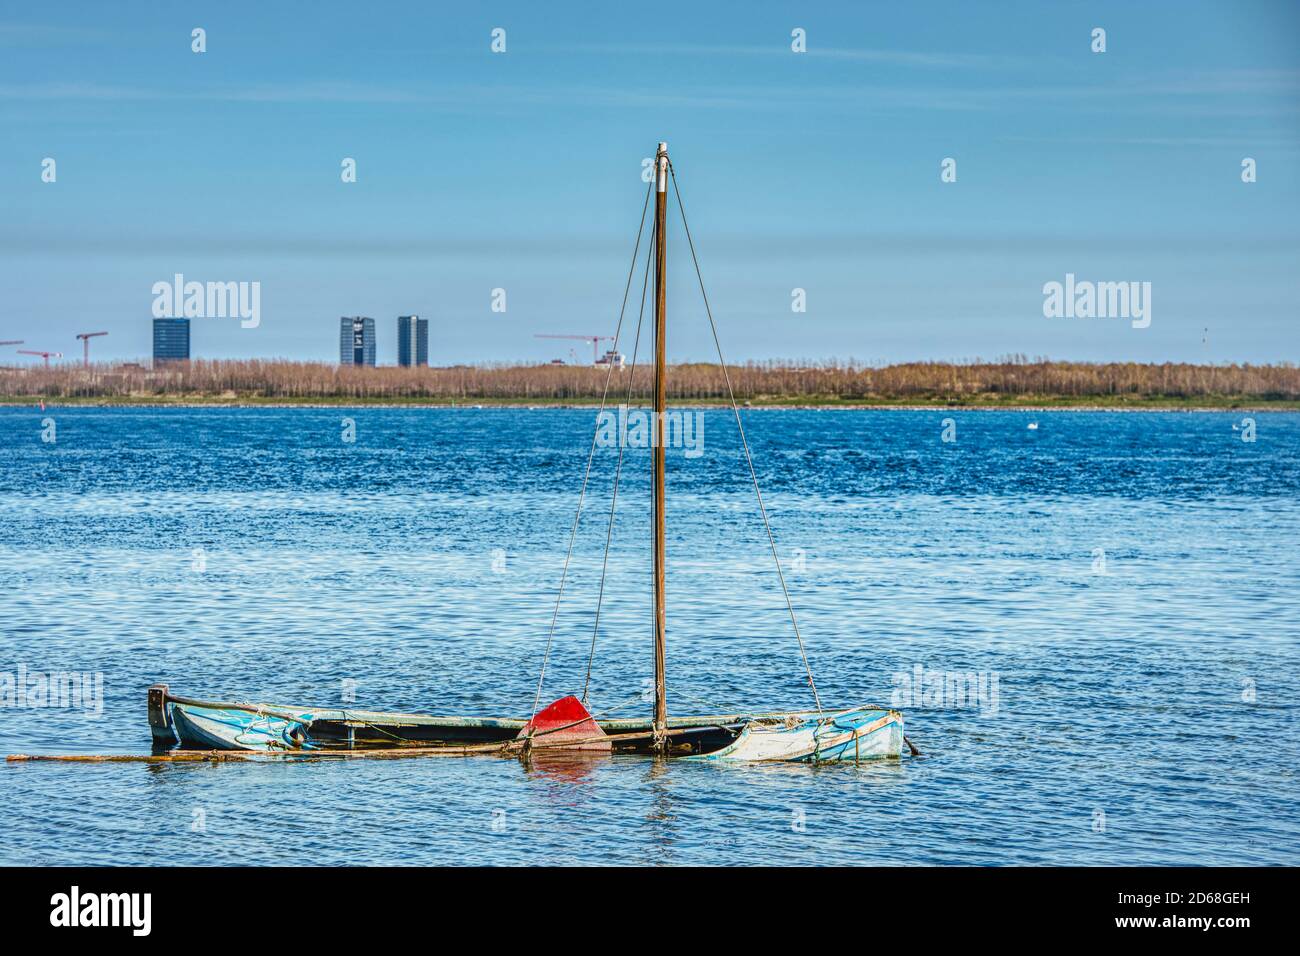 An abandoned sailing boat sunken in shallow water in a calm Baltic Sea bears resistance and decay concepts. Nature claims back what once was hers Stock Photo